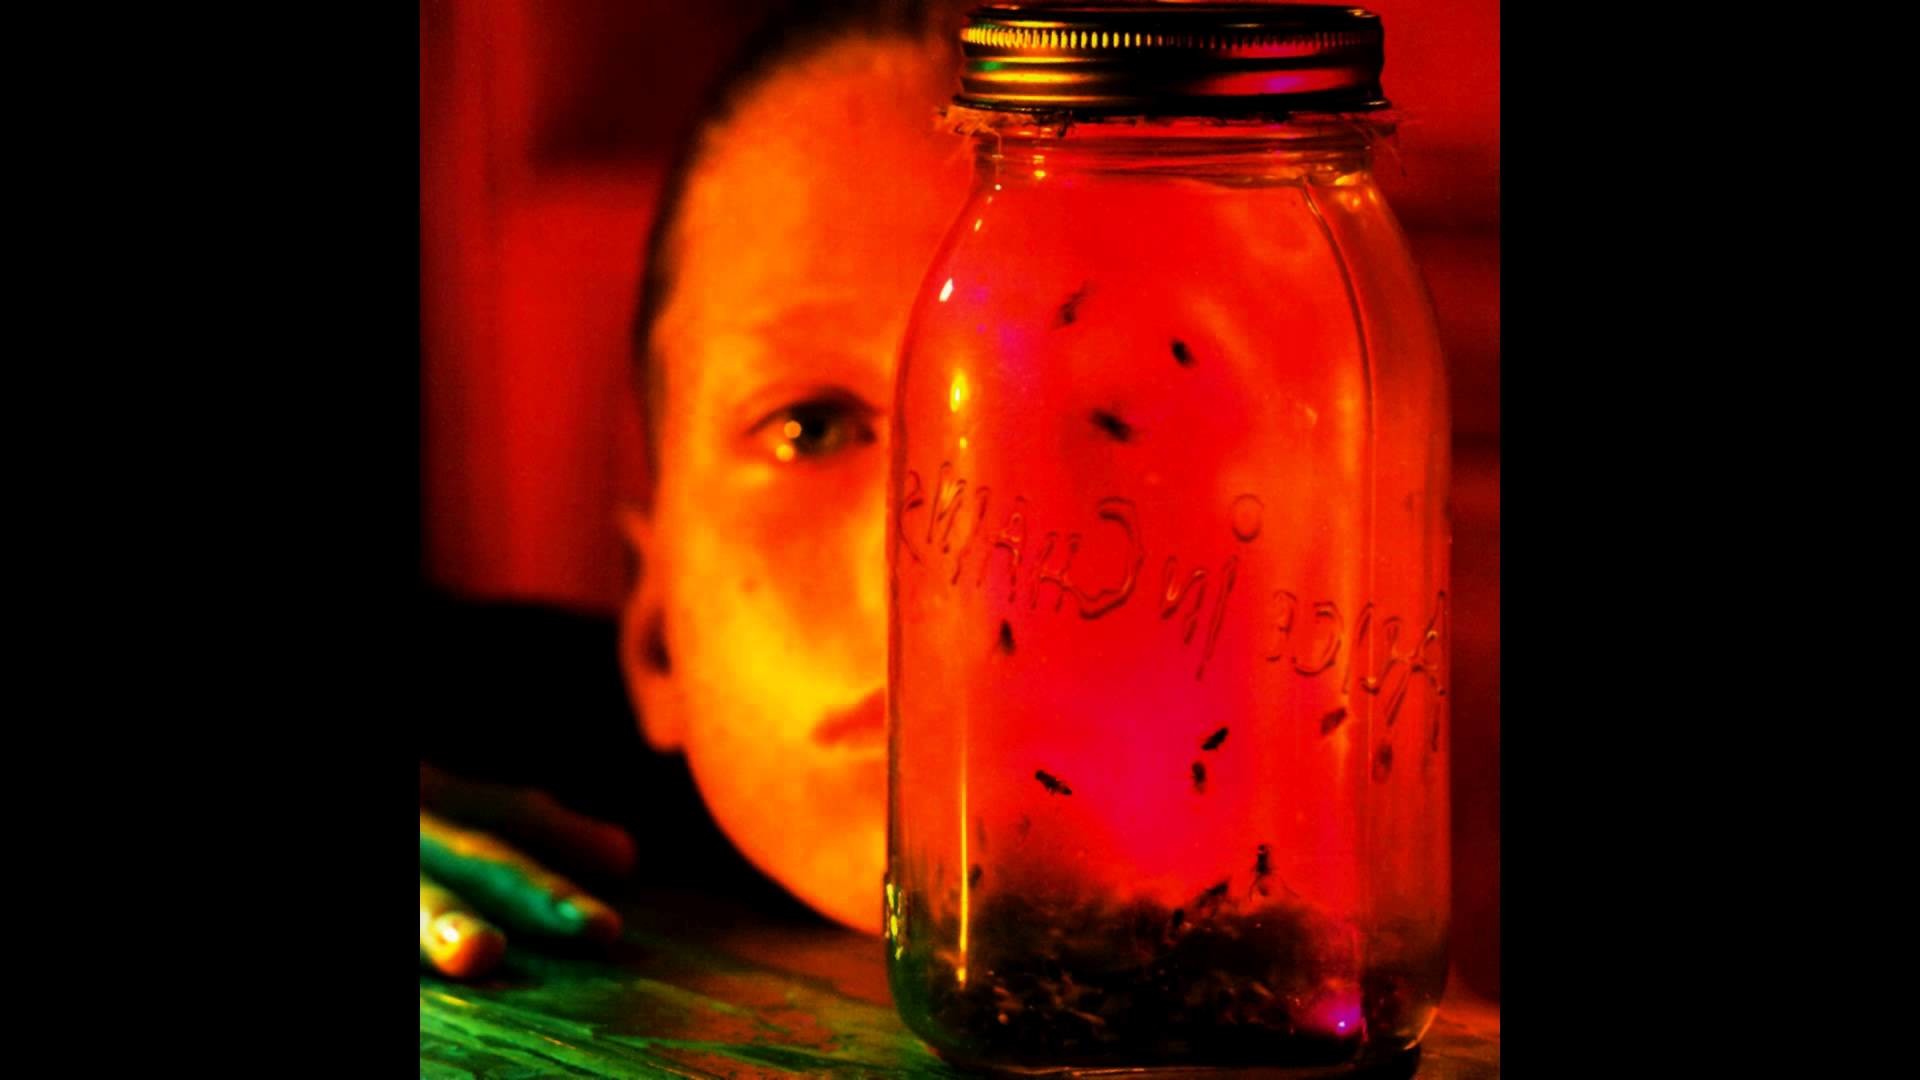 1920x1080 Alice in Chains - Jar of Flies (Full Album). My all time favorite album.  Shows their true depth and diversity. Can't be pigeonholed as grunge or  metal.